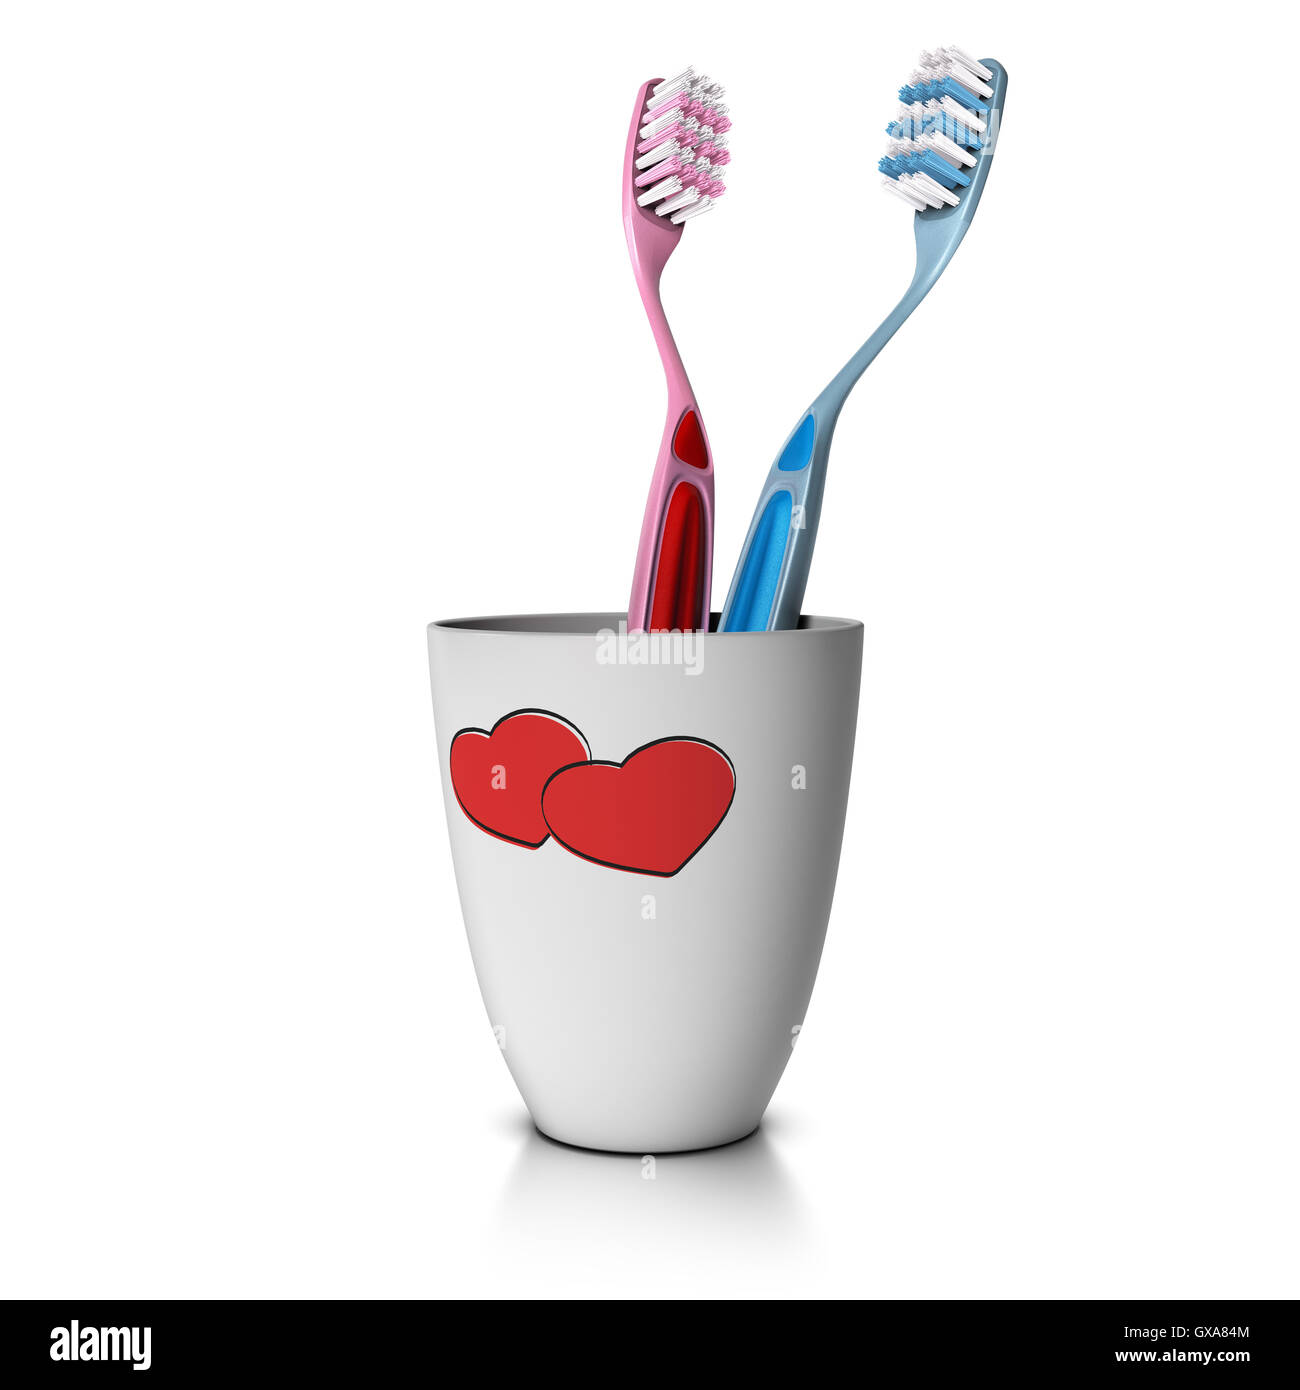 3D illustration of a tooth cup with two toothbrushes over white background. Concept of love and couple living together. Stock Photo